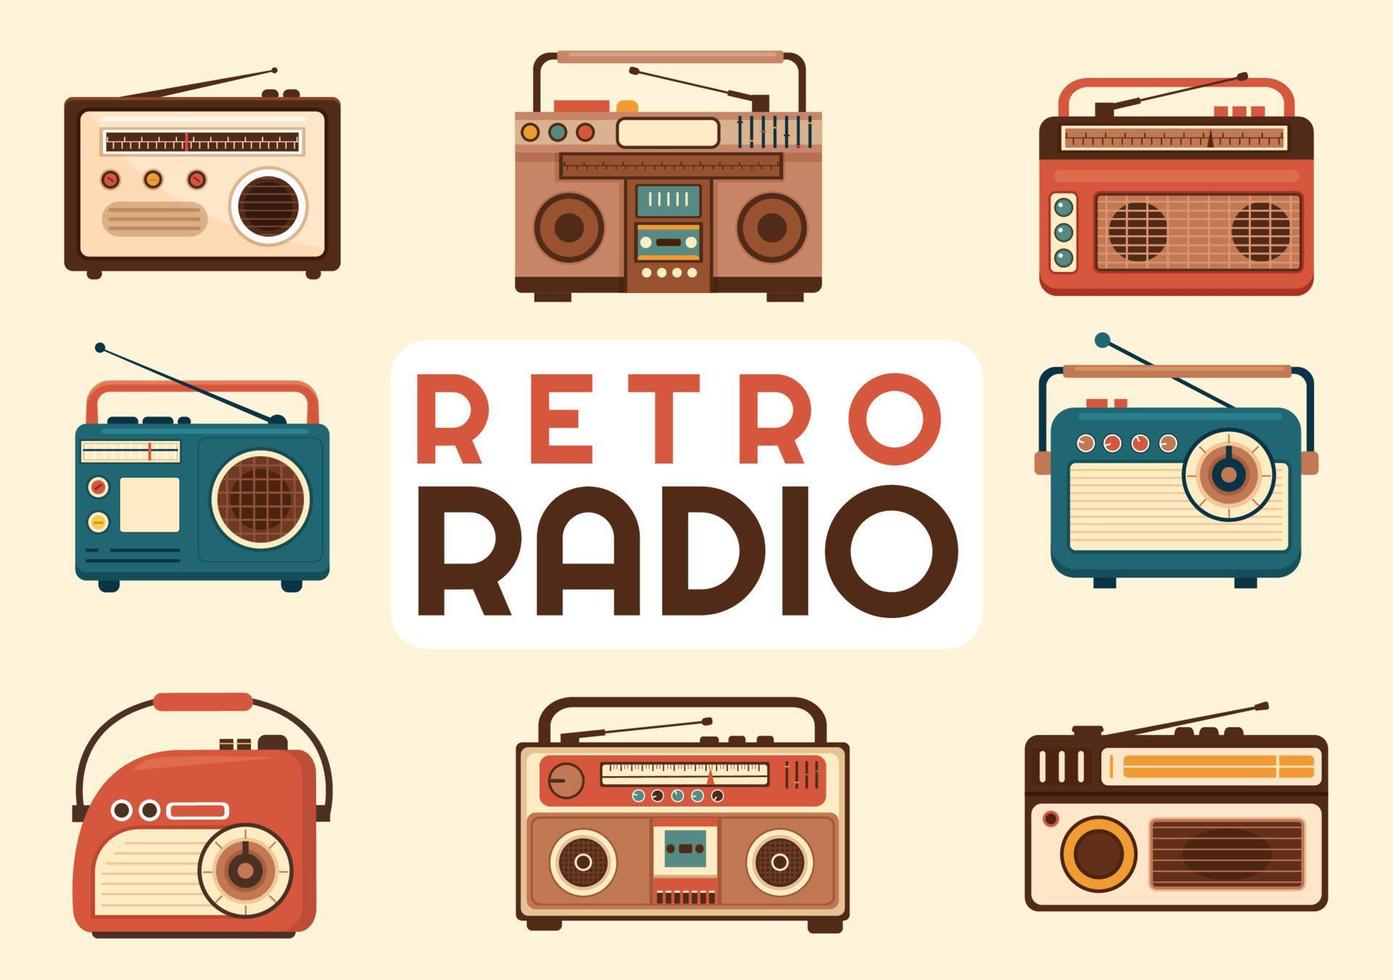 Retro Radio Player Style for Record, Old Receiver, Interviews Celebrity and Listening to Music in Template Hand Drawn Cartoon Flat Illustration vector